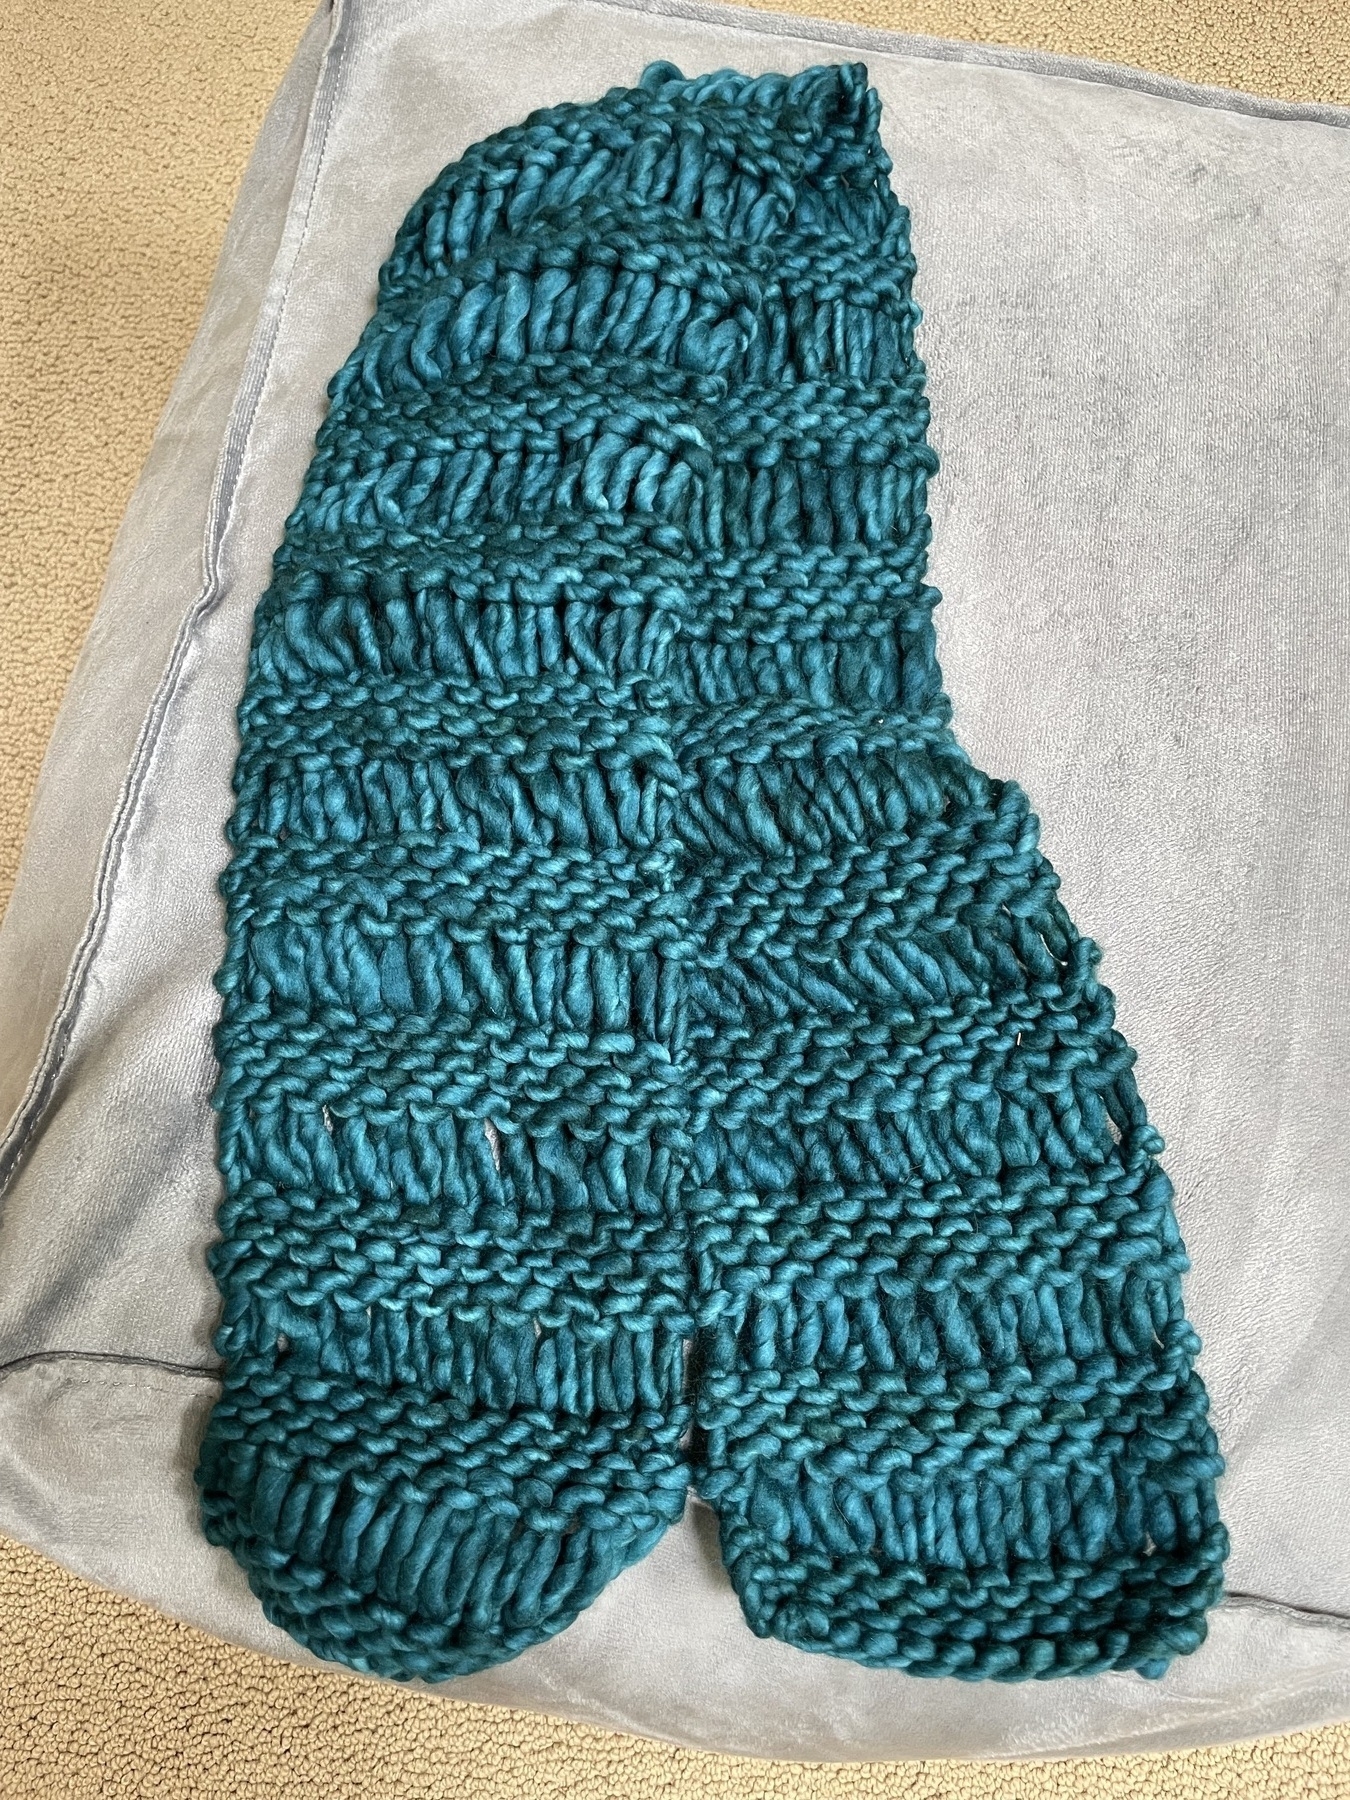 knitted drop-stitch scarf in bulky teal yarn